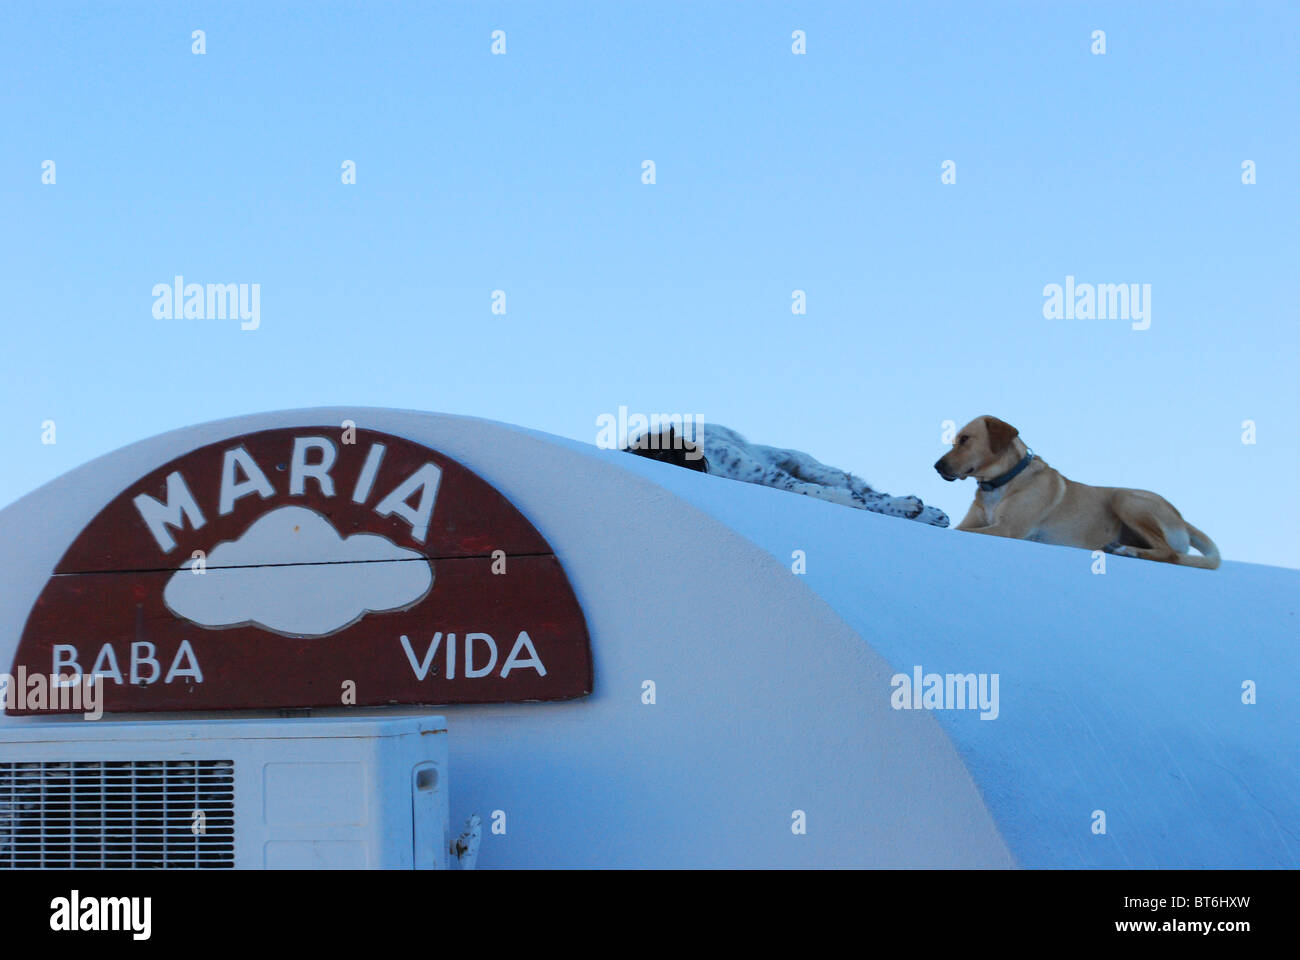 Dogs on a rooftop in Oia, Santorini, Greece. Stock Photo